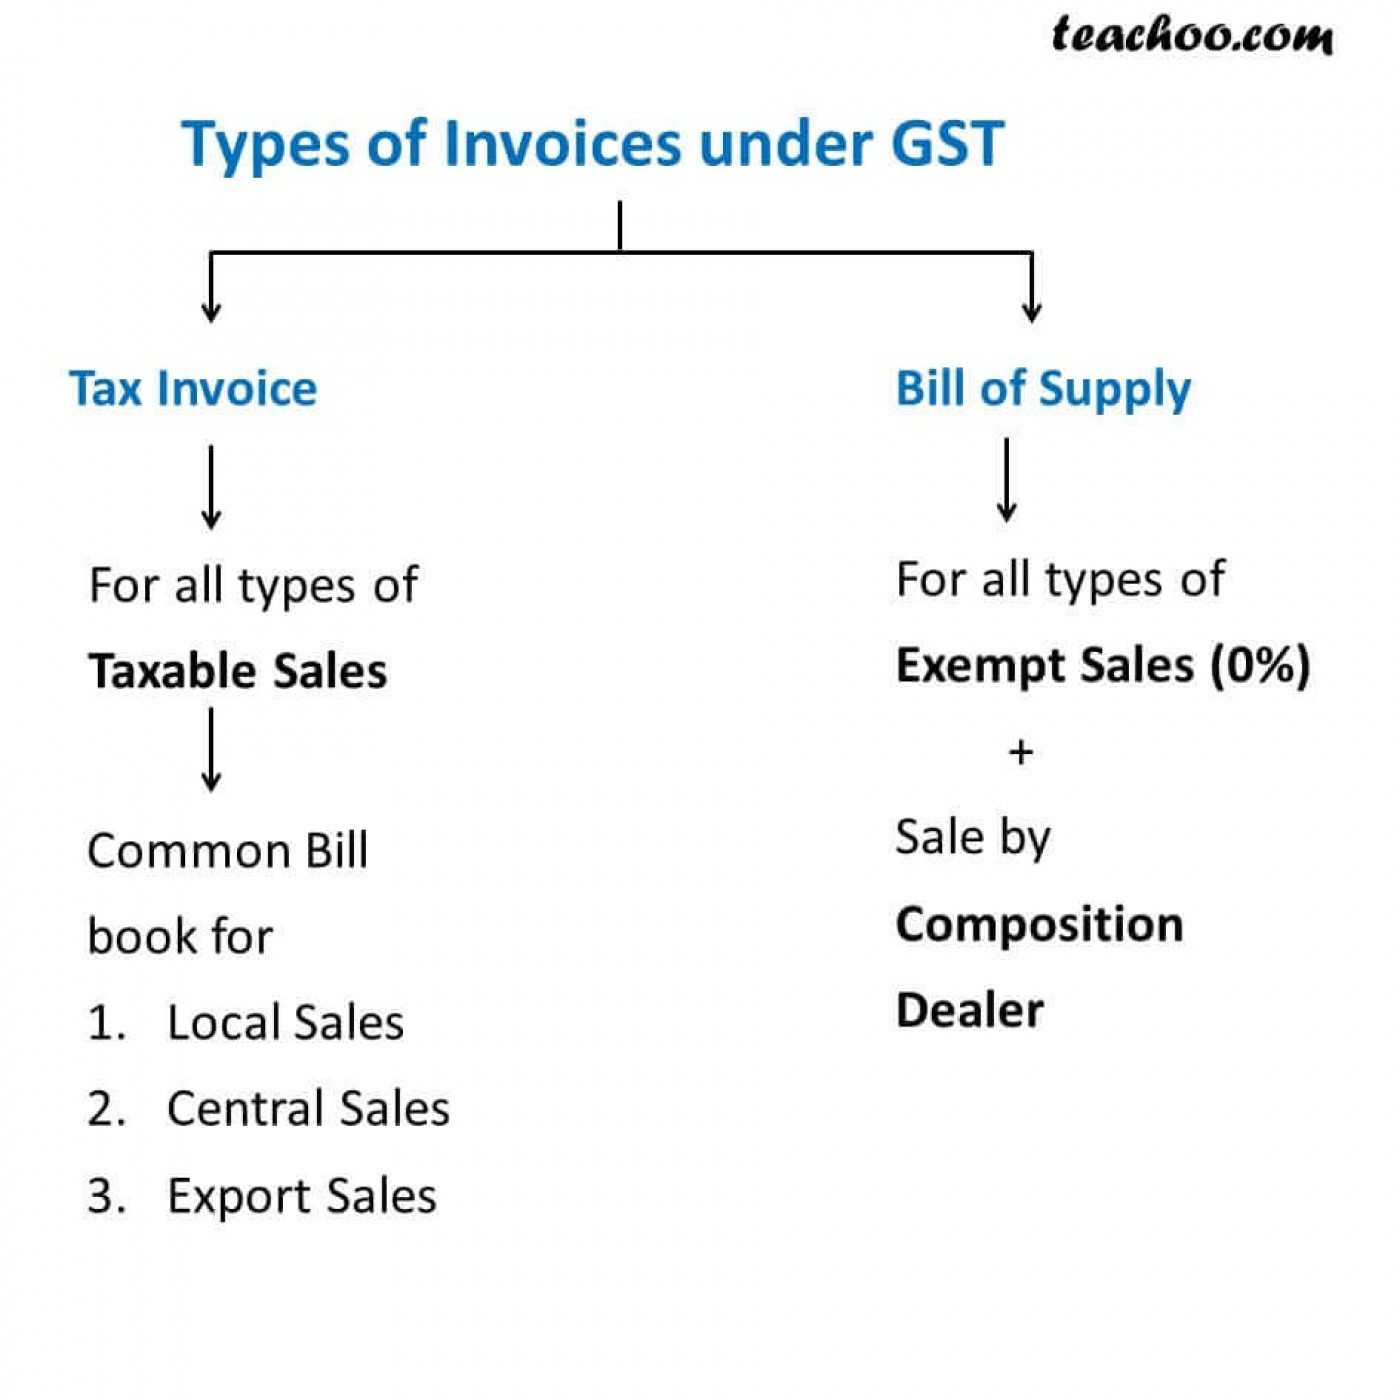 99 Customize Tax Invoice Format Under Gst For Services Layouts with Tax Invoice Format Under Gst For Services